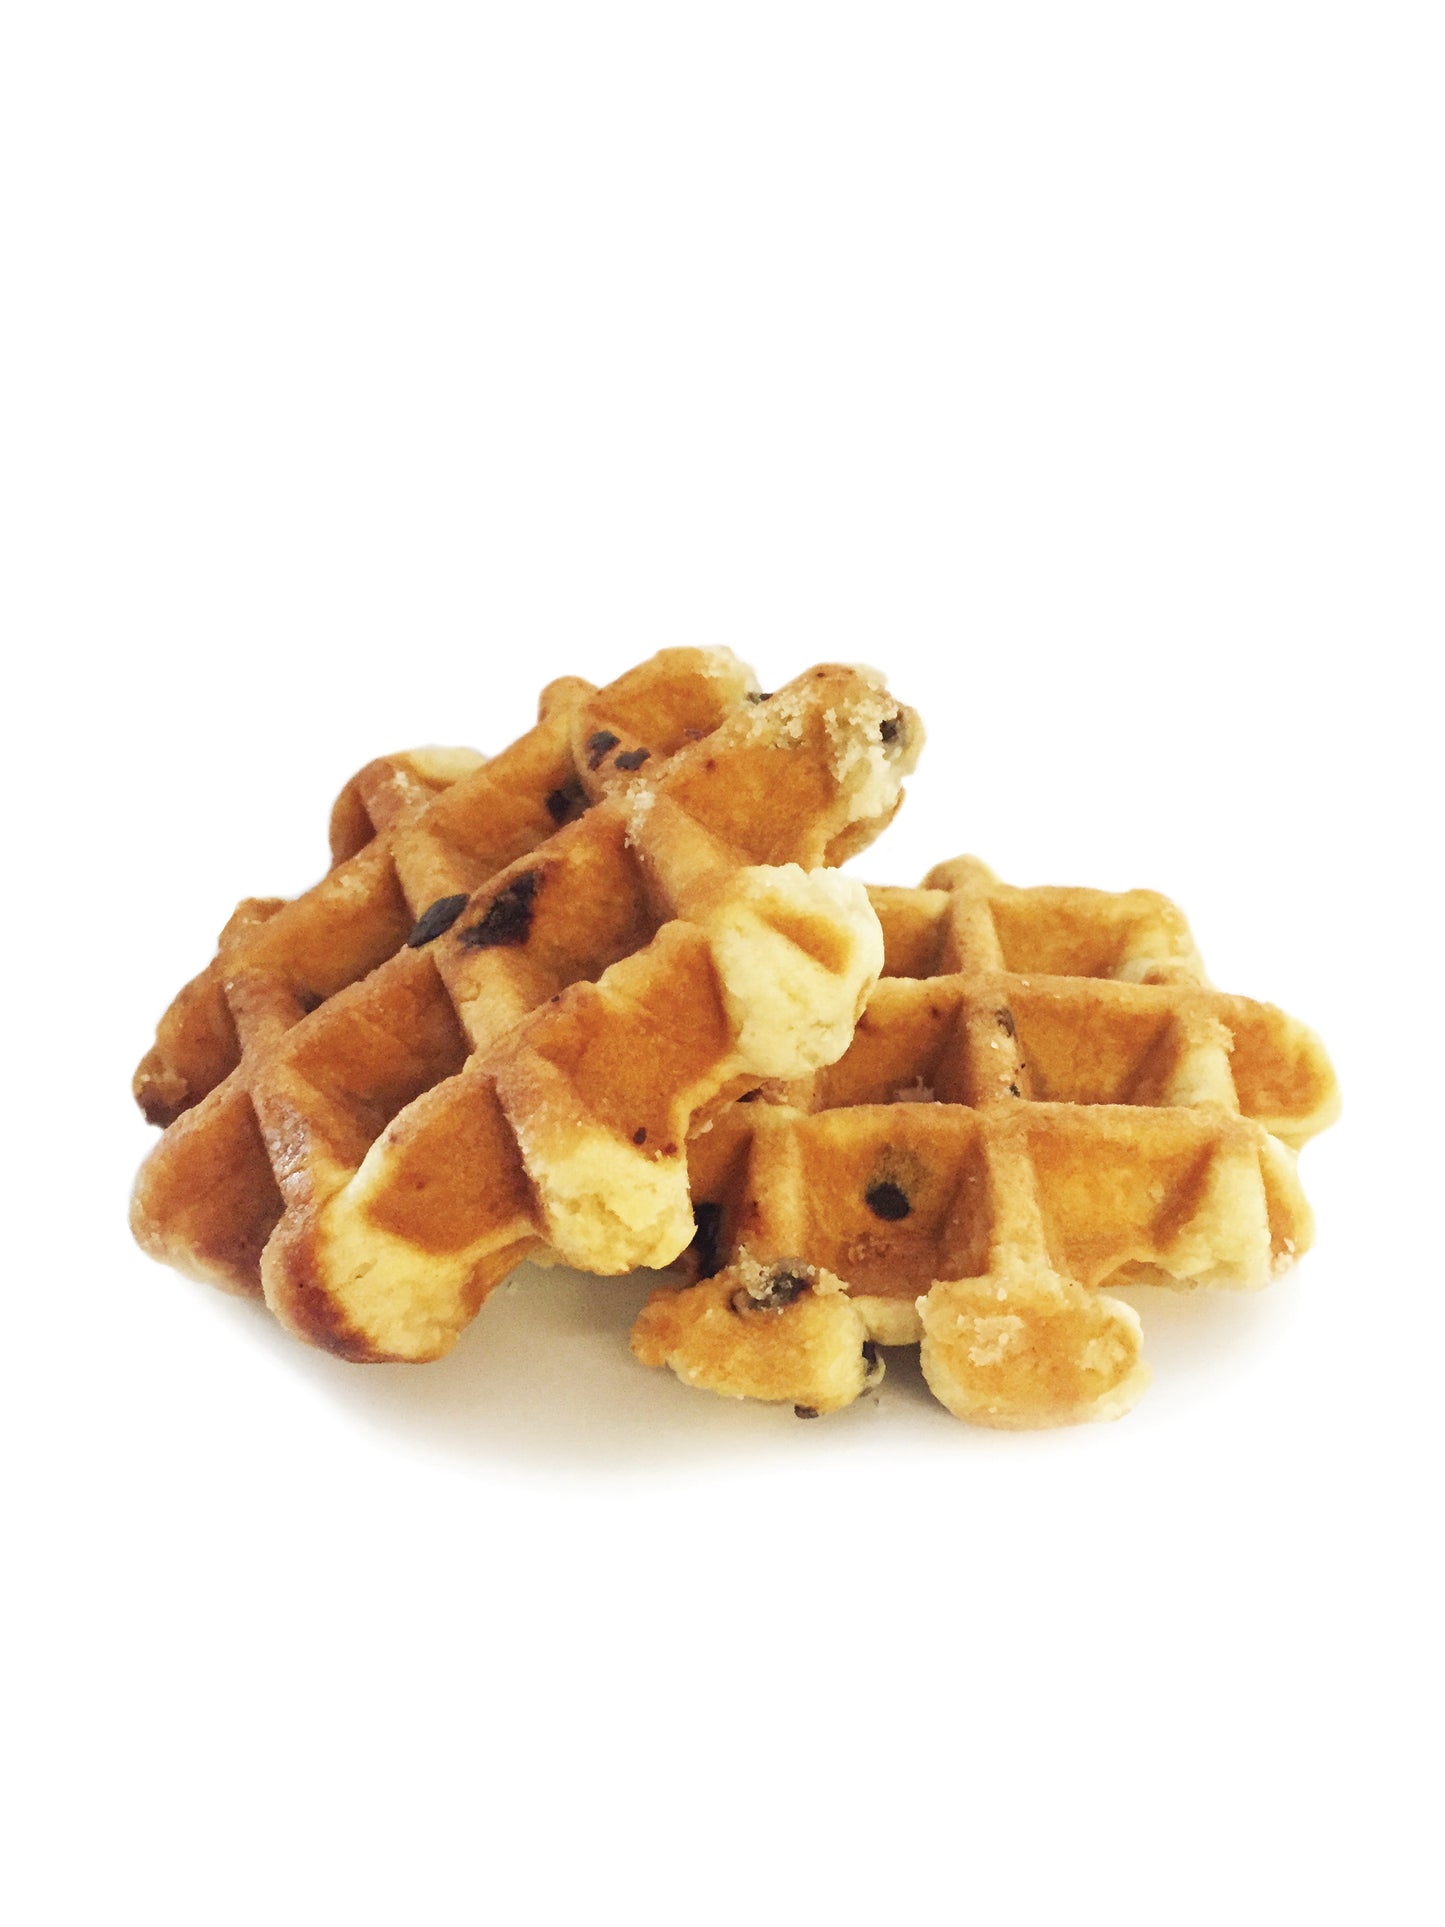 30 Count Case of Individually Wrapped (IW) Medium Liege Belgian Dark Chocolate Chip Waffles